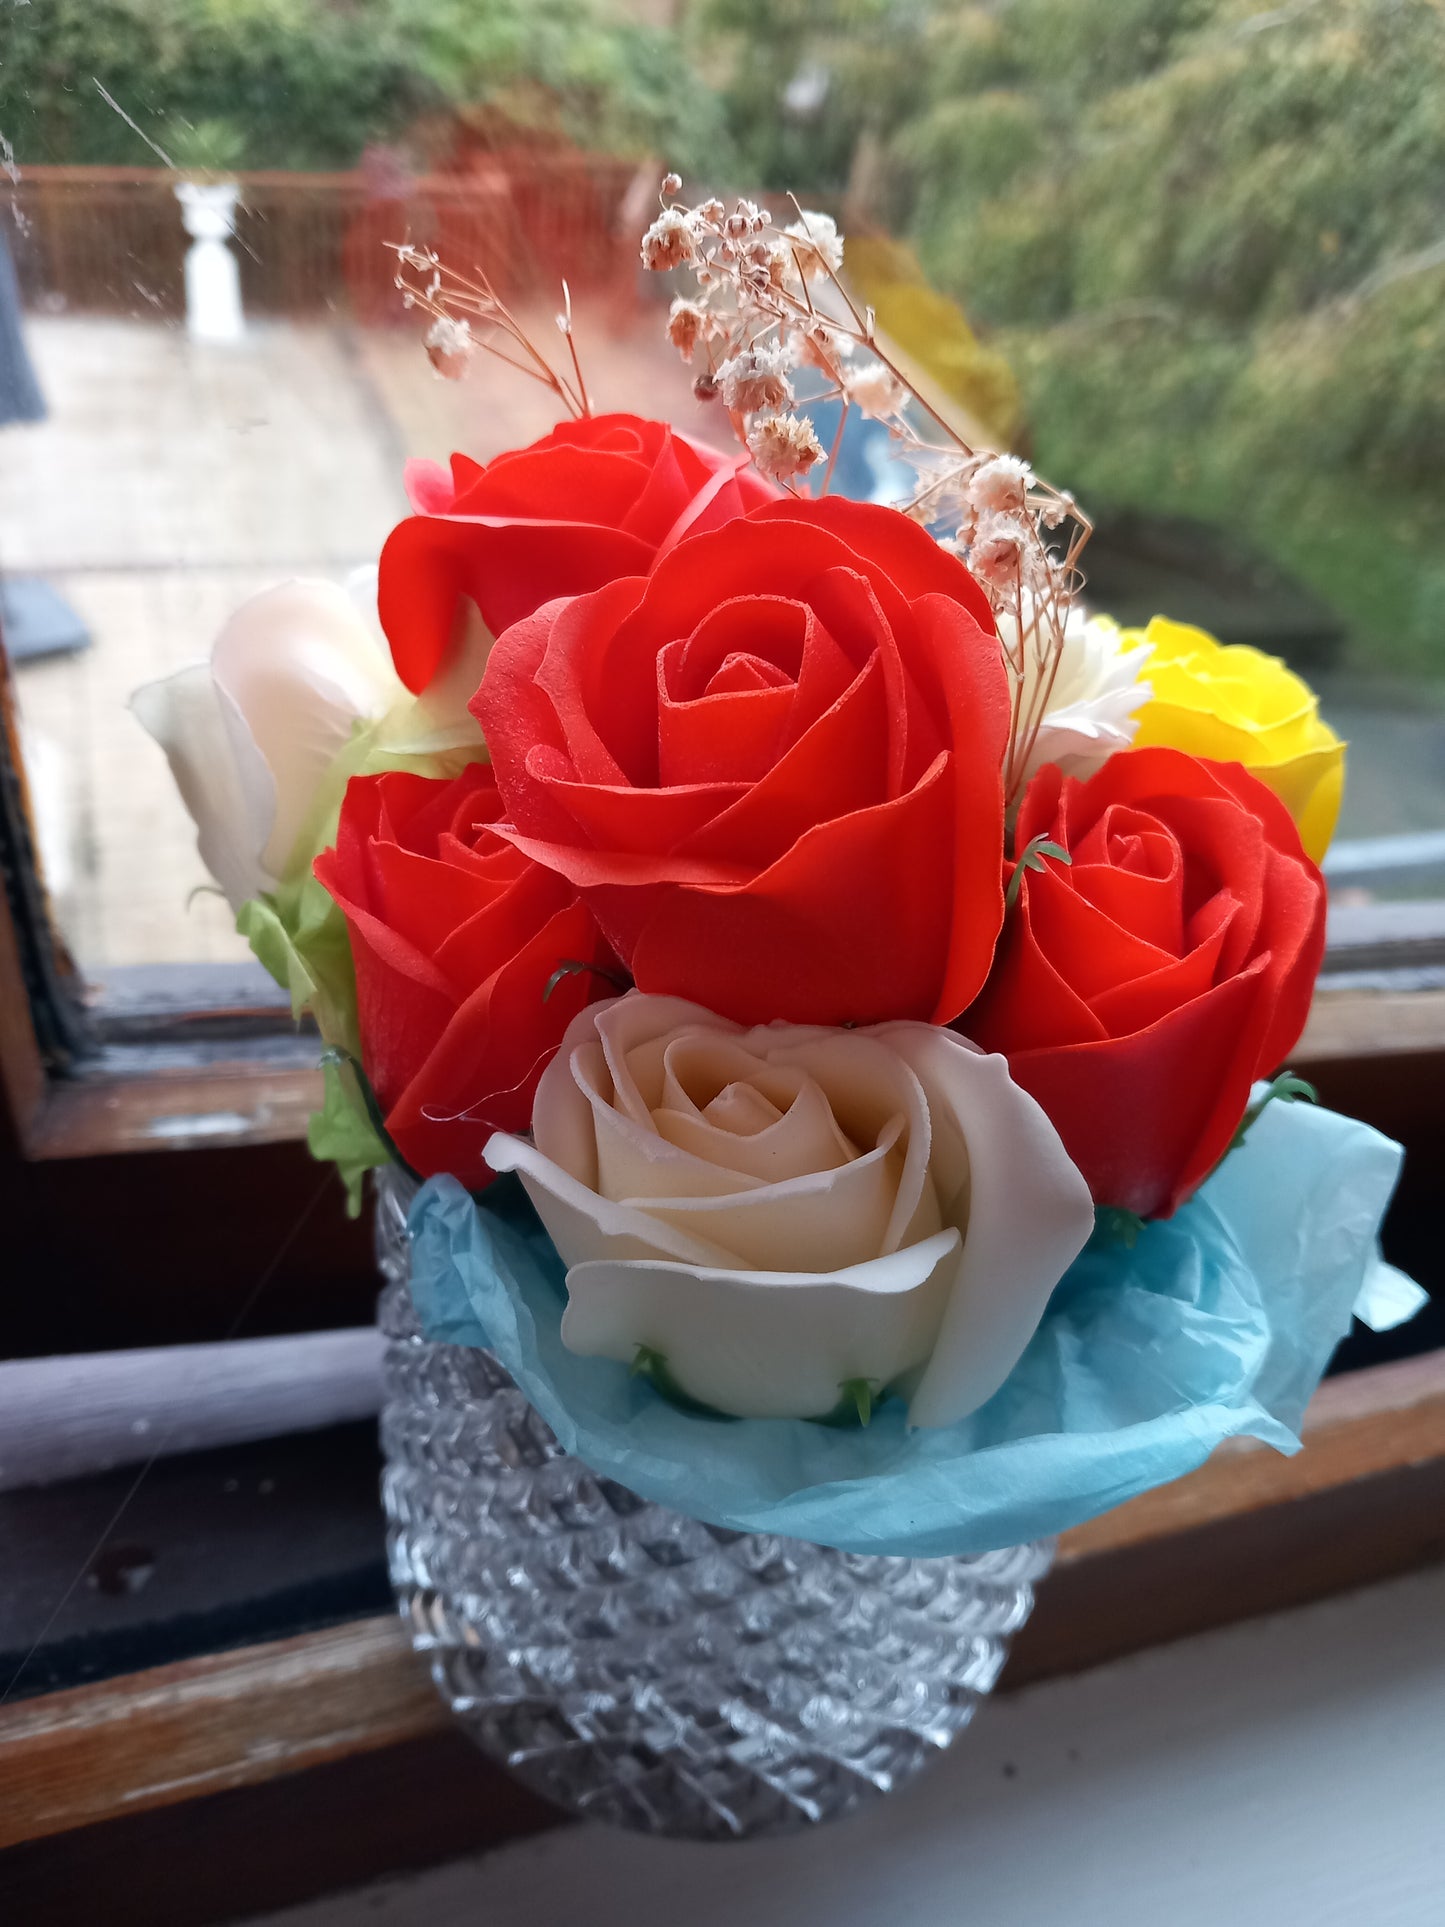 MY COLOUR CARNATIONS MULTI COLOUR FLOWER SOAP MIXED ROSES AND SUNSET ORANGE ROSE IN GLASSWARE